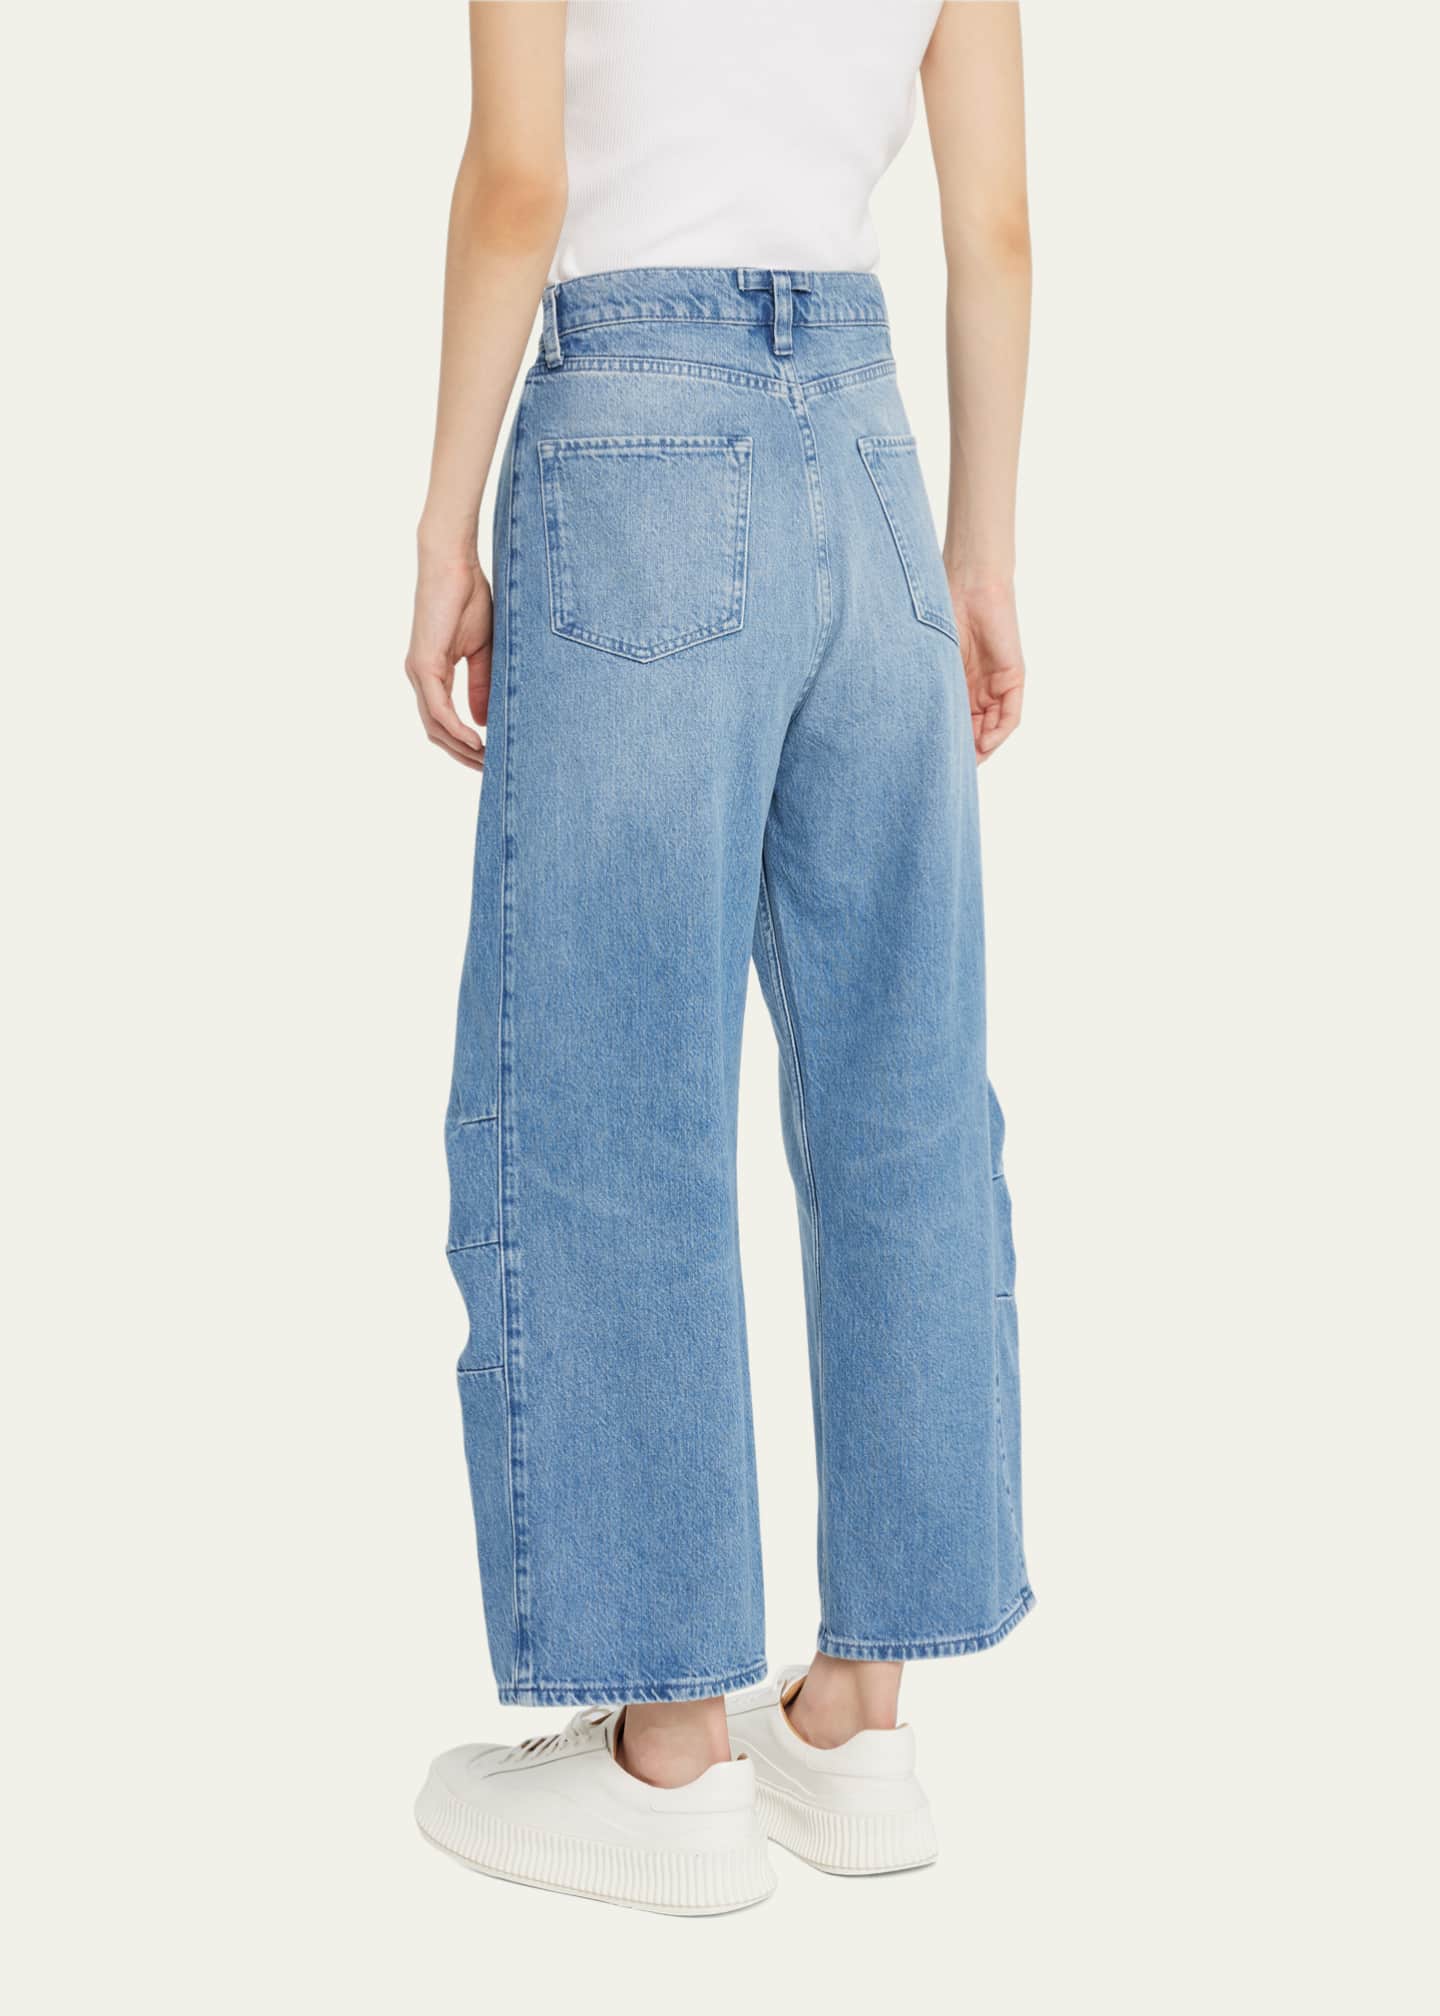 Triarchy Ms.Walker Mid-Rise Constructed Jeans - Bergdorf Goodman